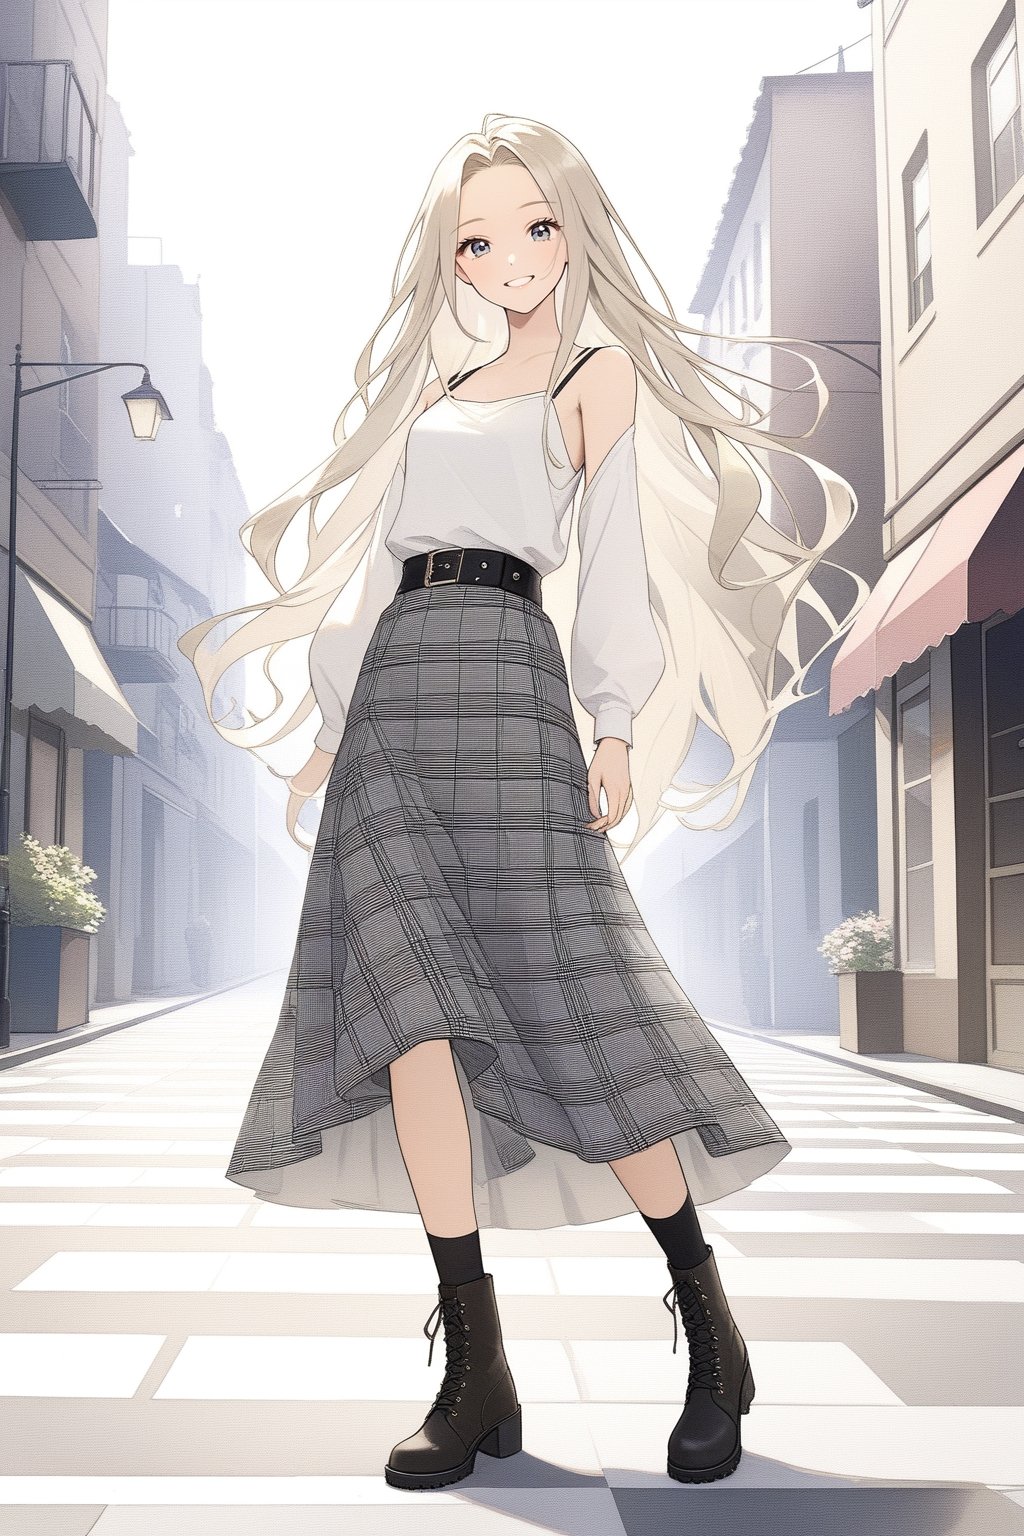 A long-haired beauty smiling, wearing a white top with a thin-strapped checkered vest over it, paired with a checkered long skirt and boots, with a street background.